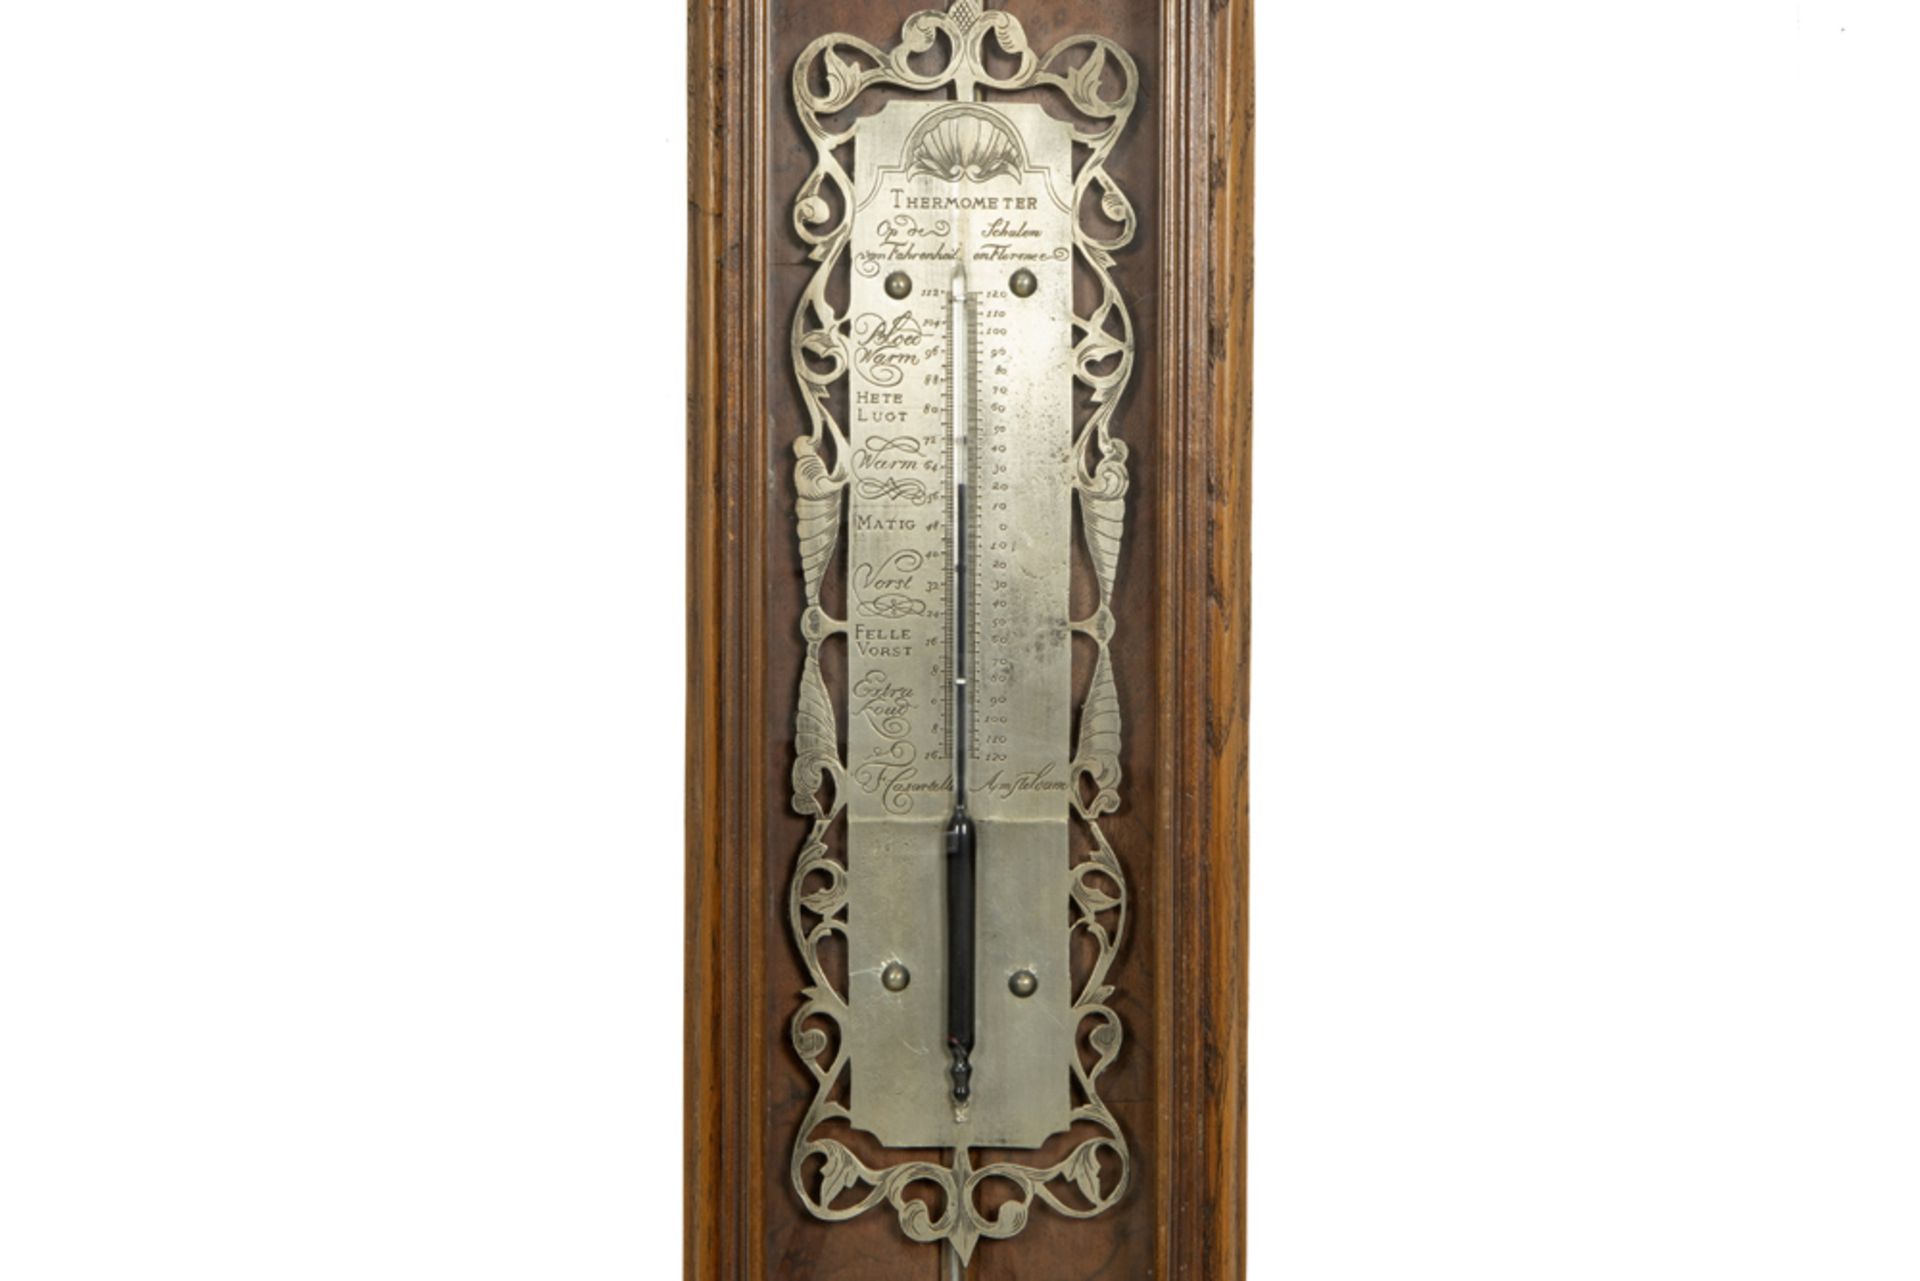 19th Cent. Dutch barometer with a case in burr of walnut, ebonized wood and walnut with Empire style - Image 3 of 3